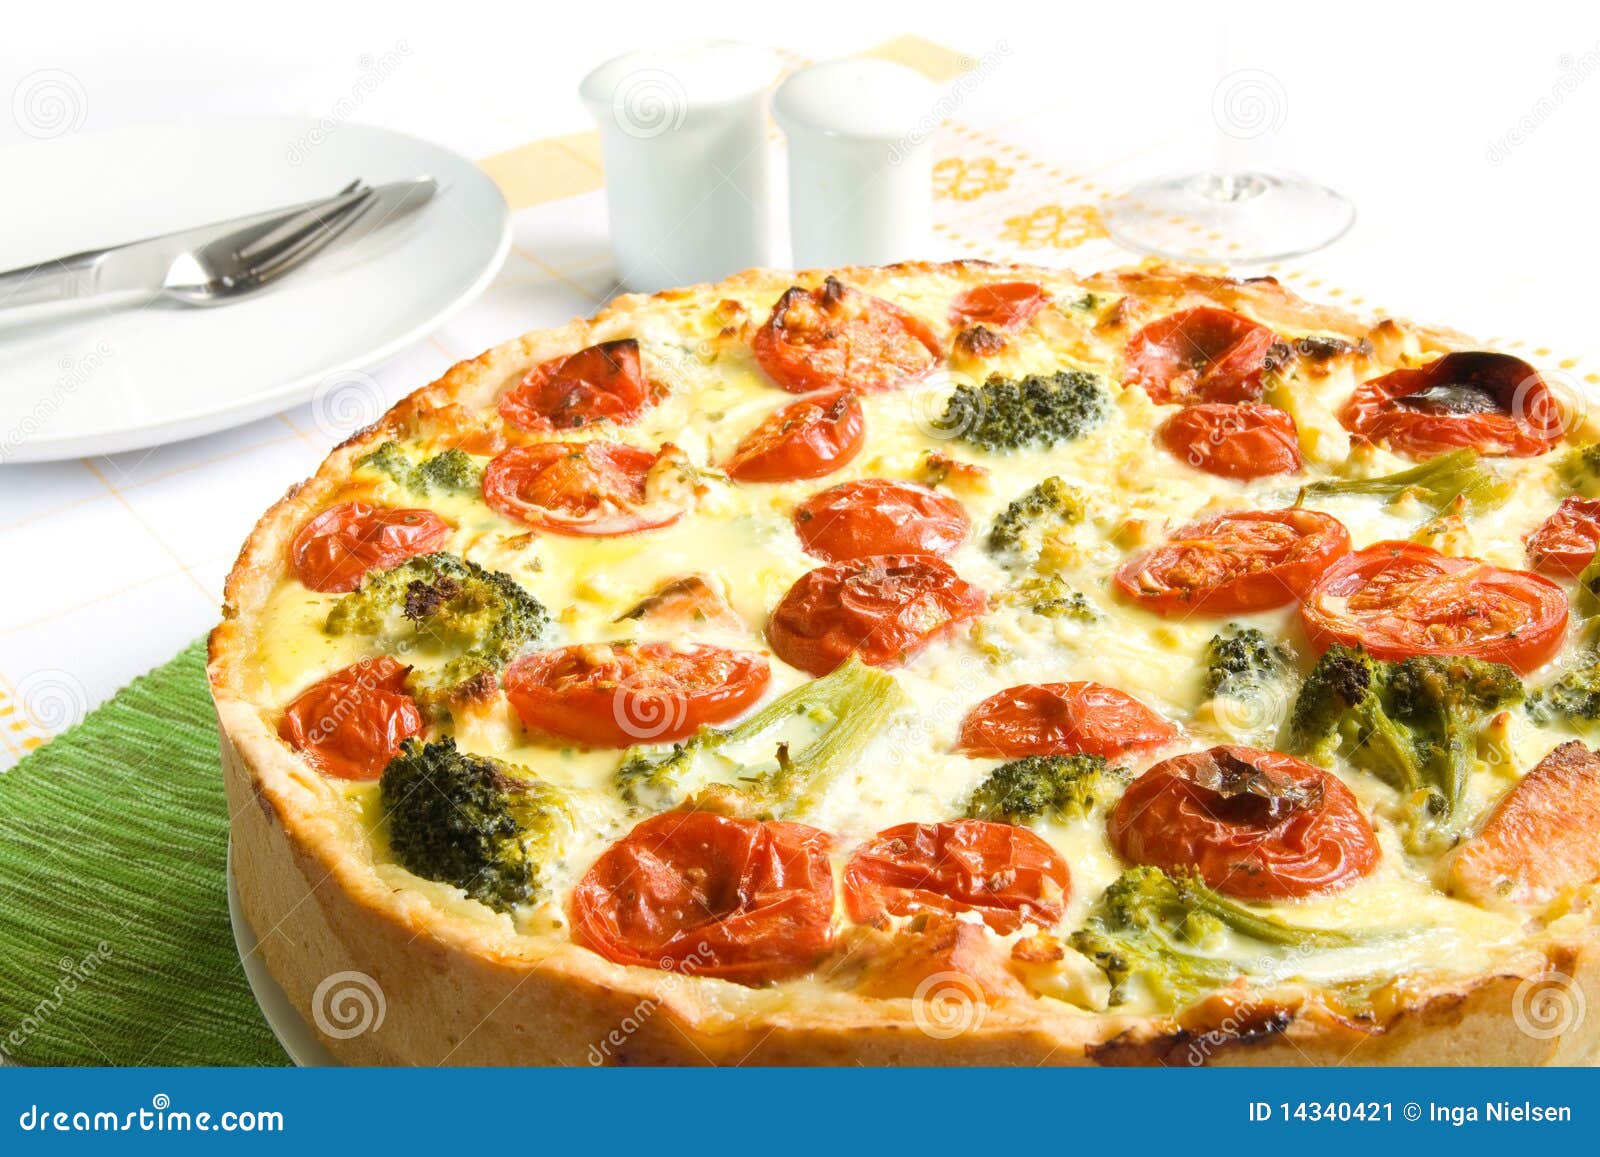 Quiche stock image. Image of quiche, table, baked, meal - 14340421